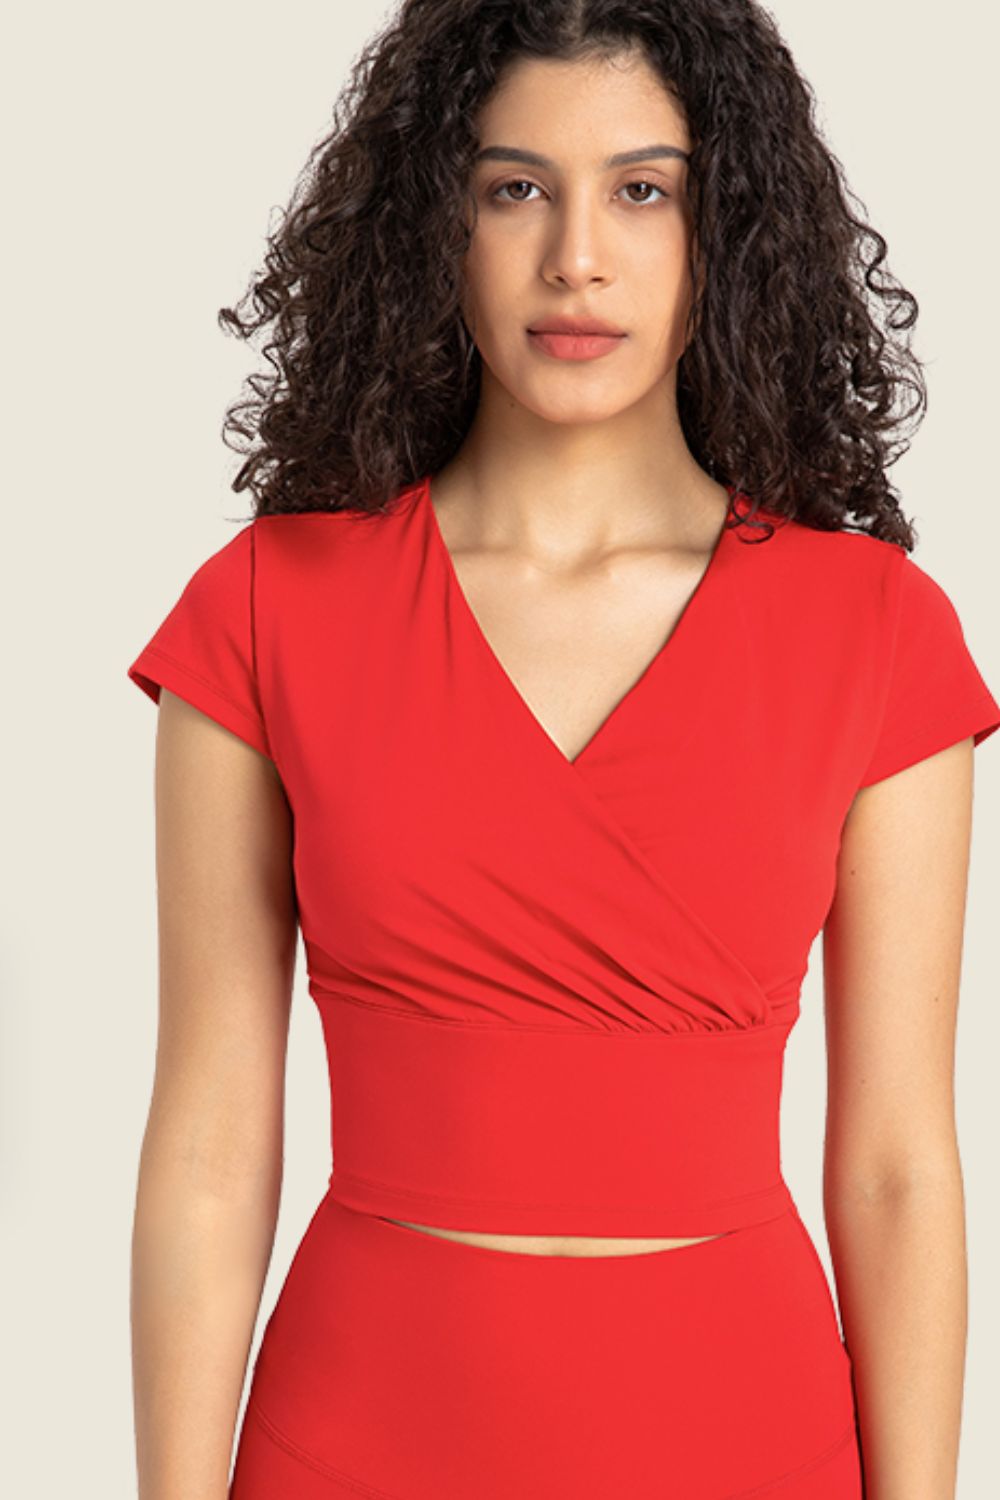 Gathered Detail Surplice Short Sleeve Sports Top - Crop Tops & Tank Tops - FITGGINS